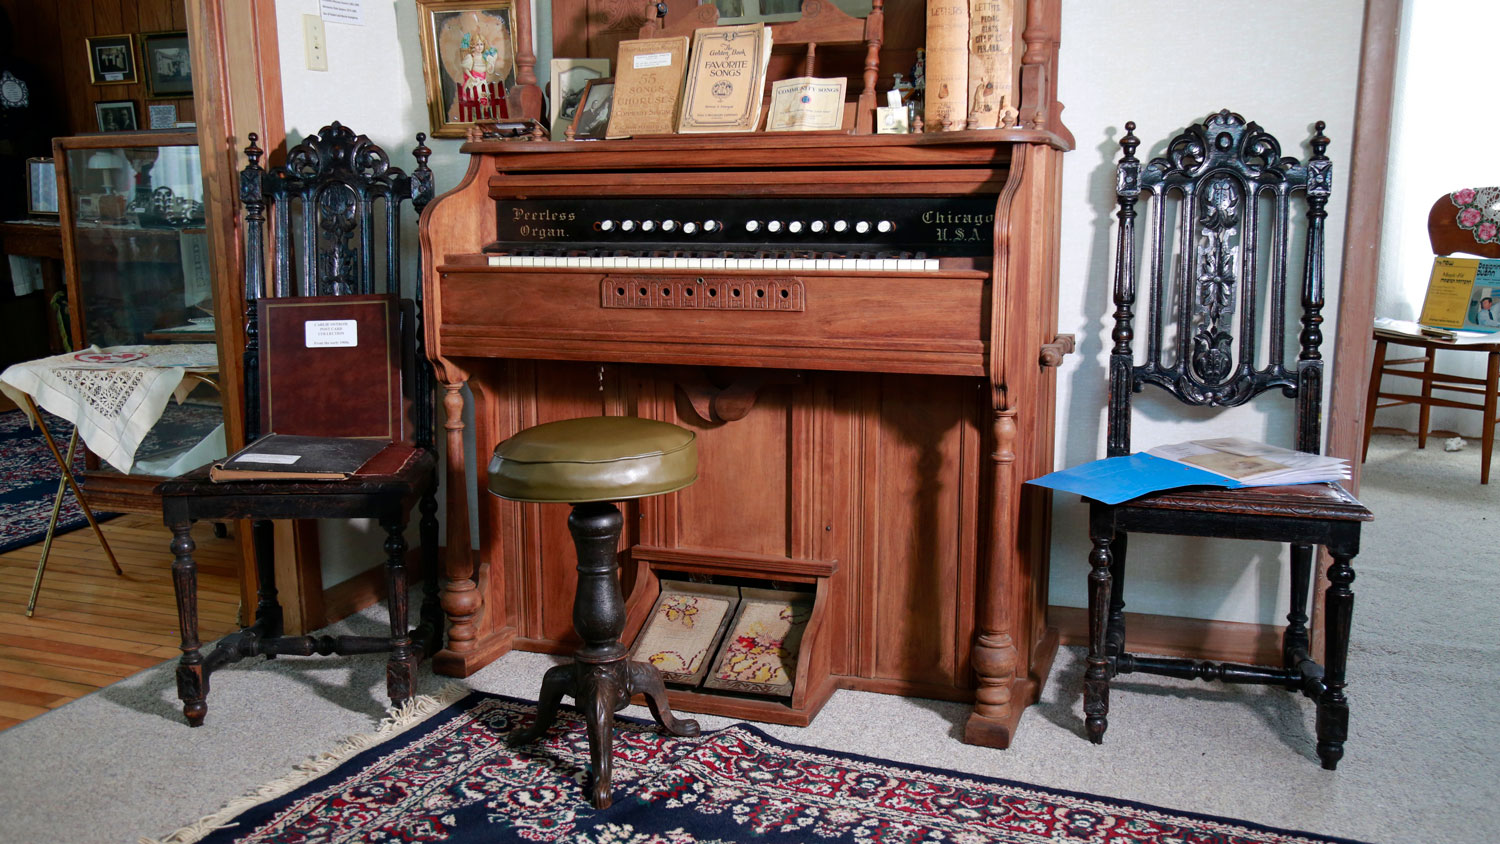 Antique organ with music books in the parlor of the Johanson House